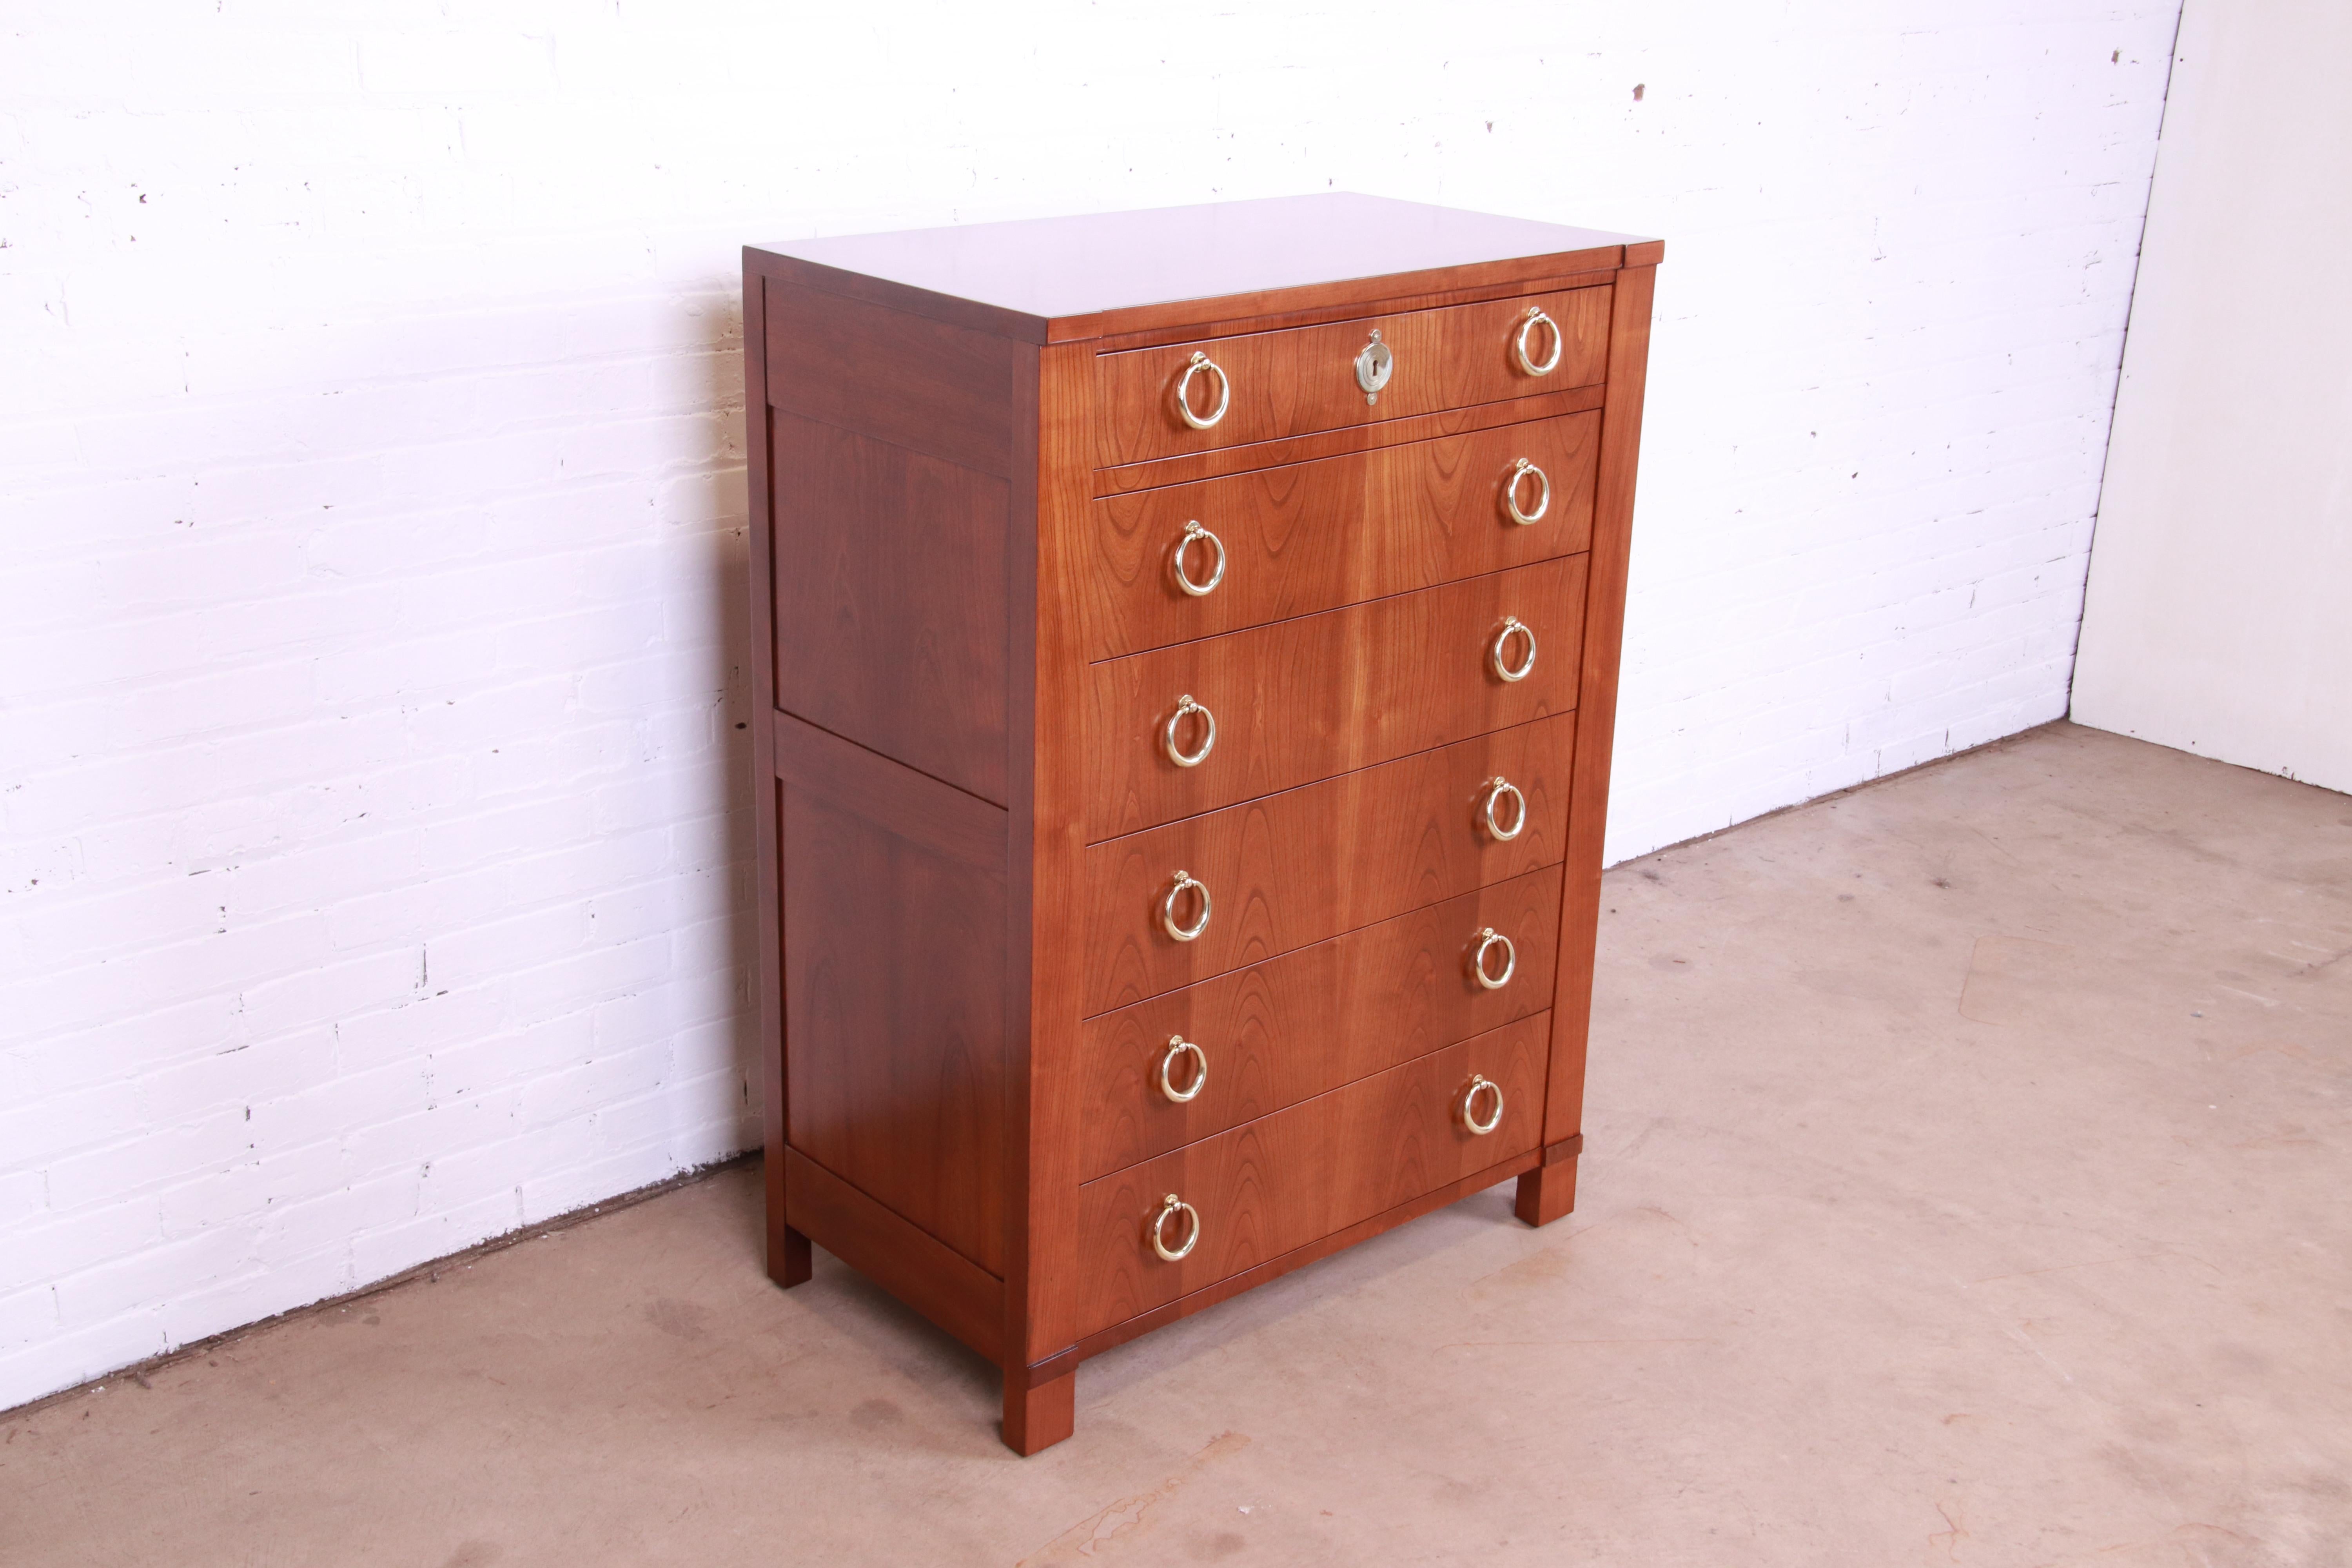 20th Century Baker Furniture French Empire Cherry Wood Highboy Dresser, Newly Refinished For Sale